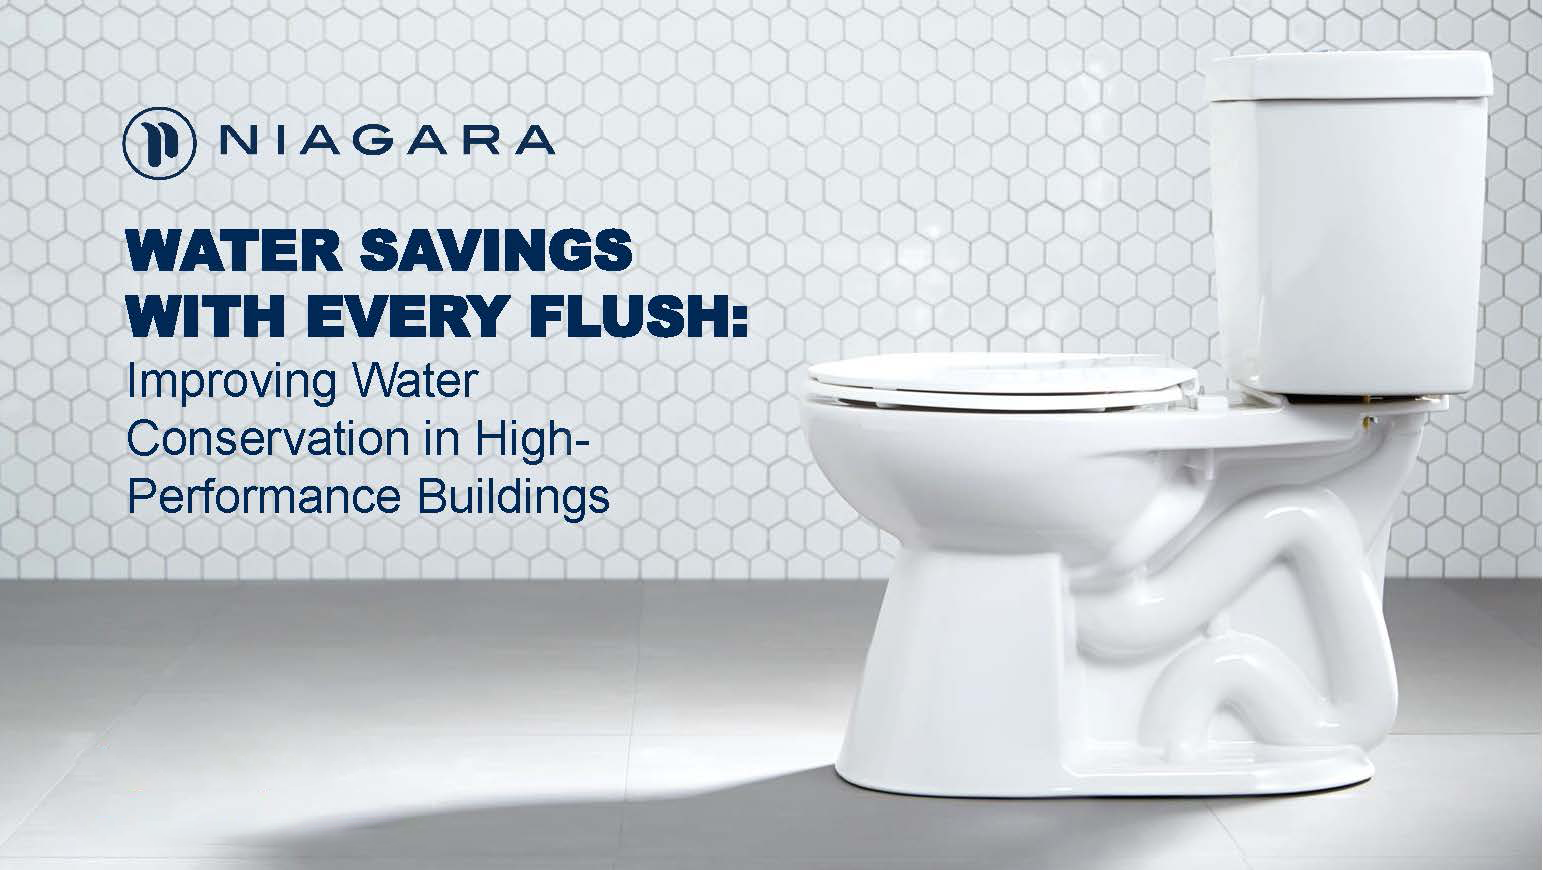 Water Savings with Every Flush course